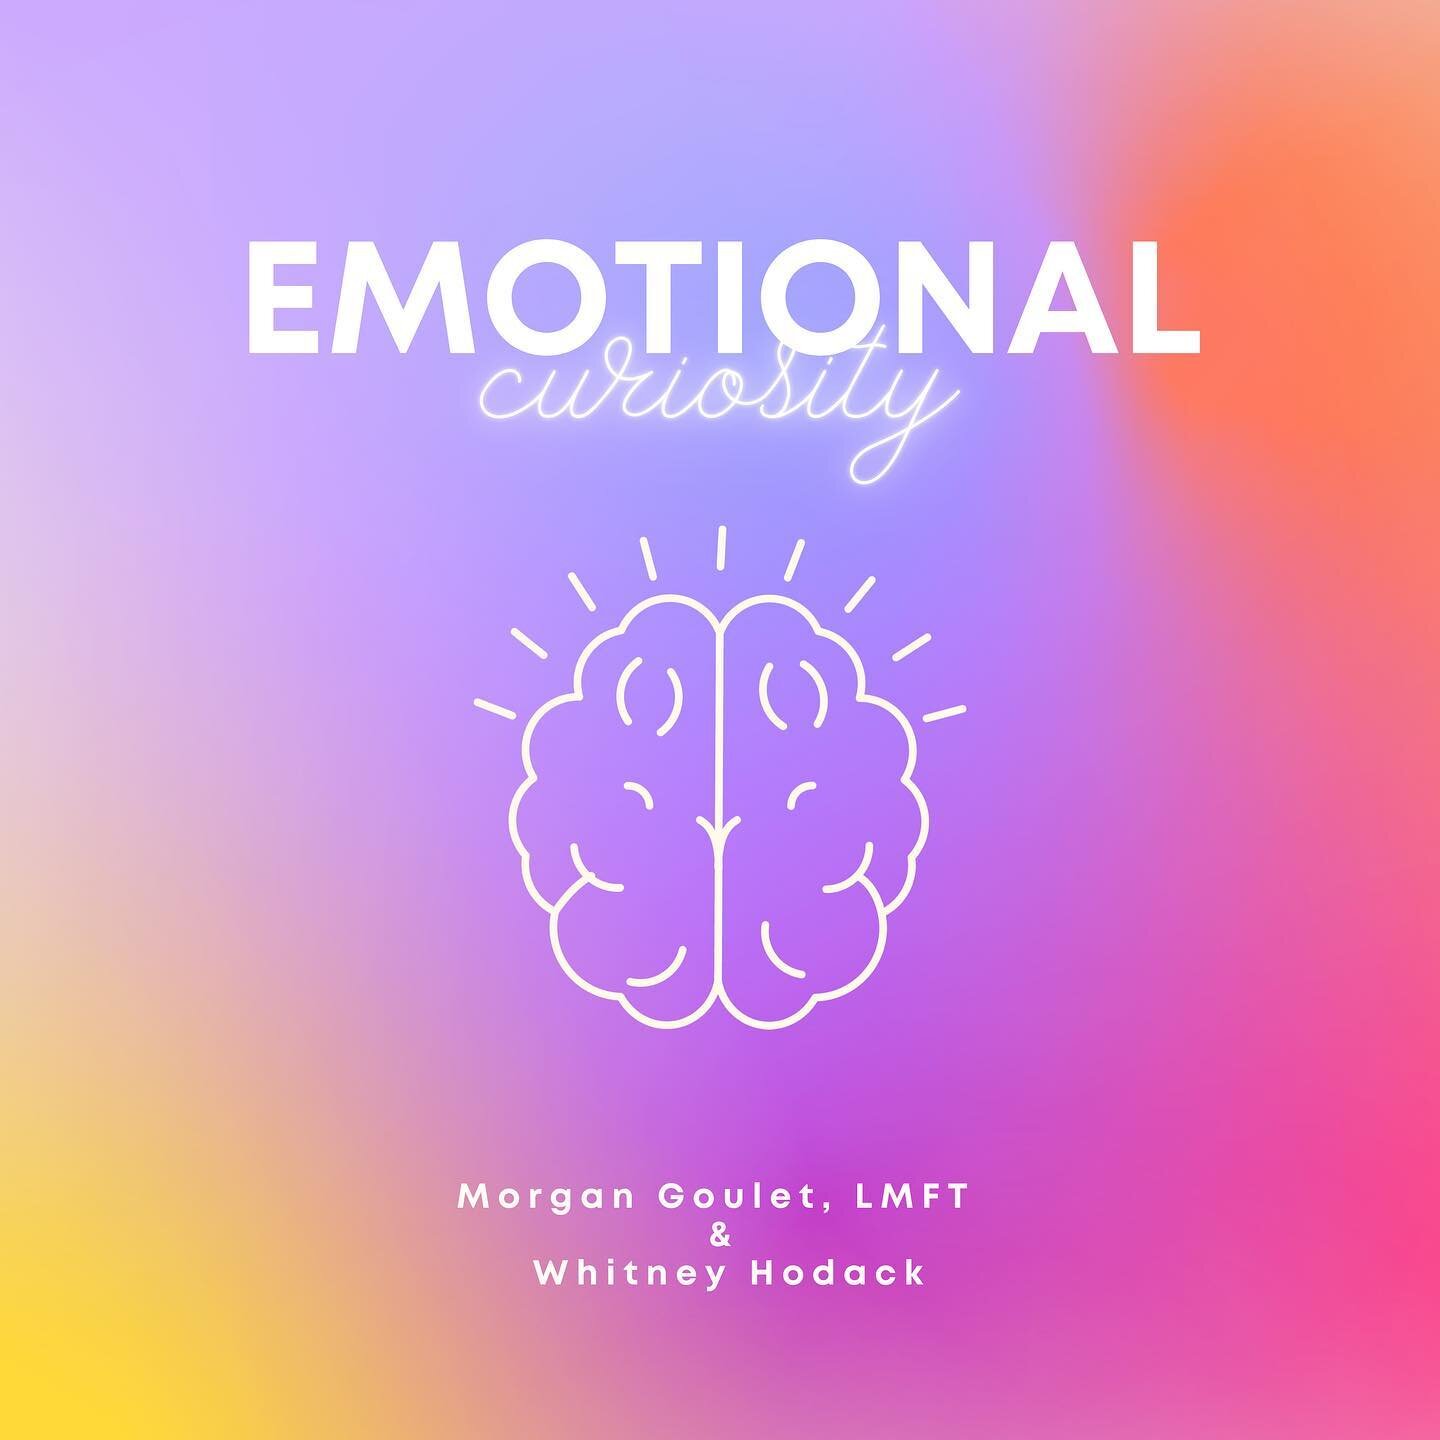 Our podcast Emotional Curiosity is LIVE!!! Join my dear friend Whitney Hodack and I as we discuss common mental health issues, how to identify them, and how to help yourself, help others, and live your fullest life. Our hope is to make discussions ar